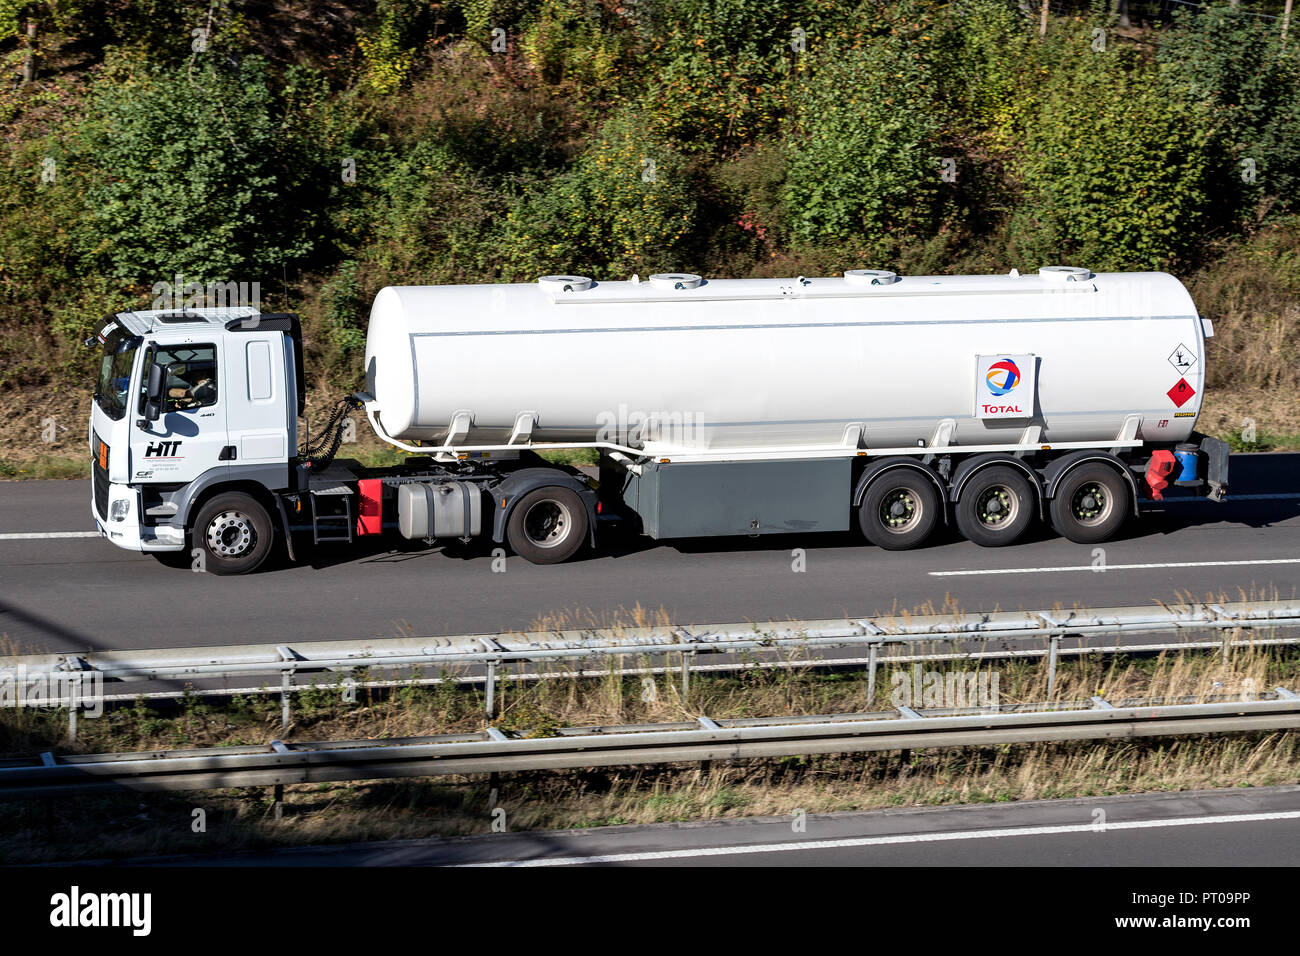 Total truck on motorway. Total s a French multinational integrated oil and gas company and one of the seven Supermajor oil companies in the world. Stock Photo